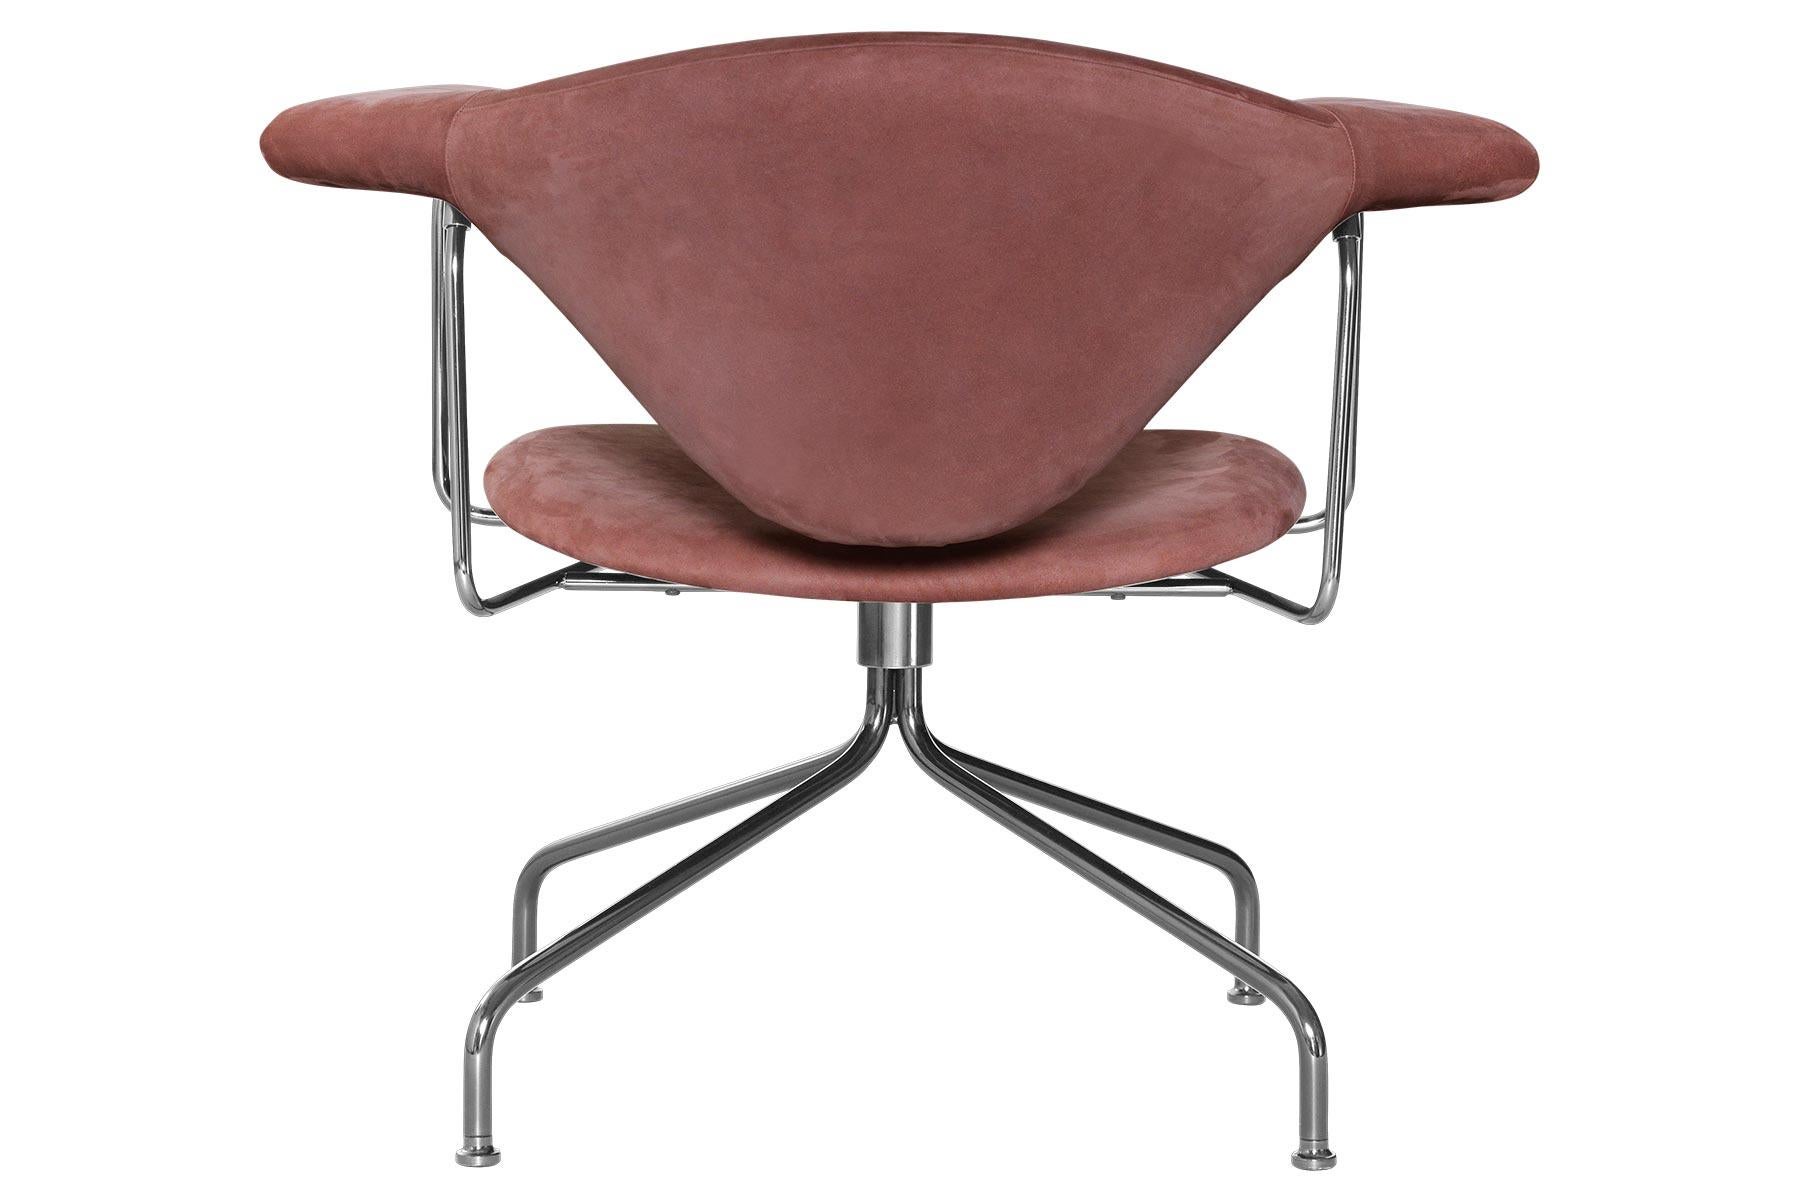 Masculo Lounge Chair, Swivel Base In Excellent Condition For Sale In Berkeley, CA